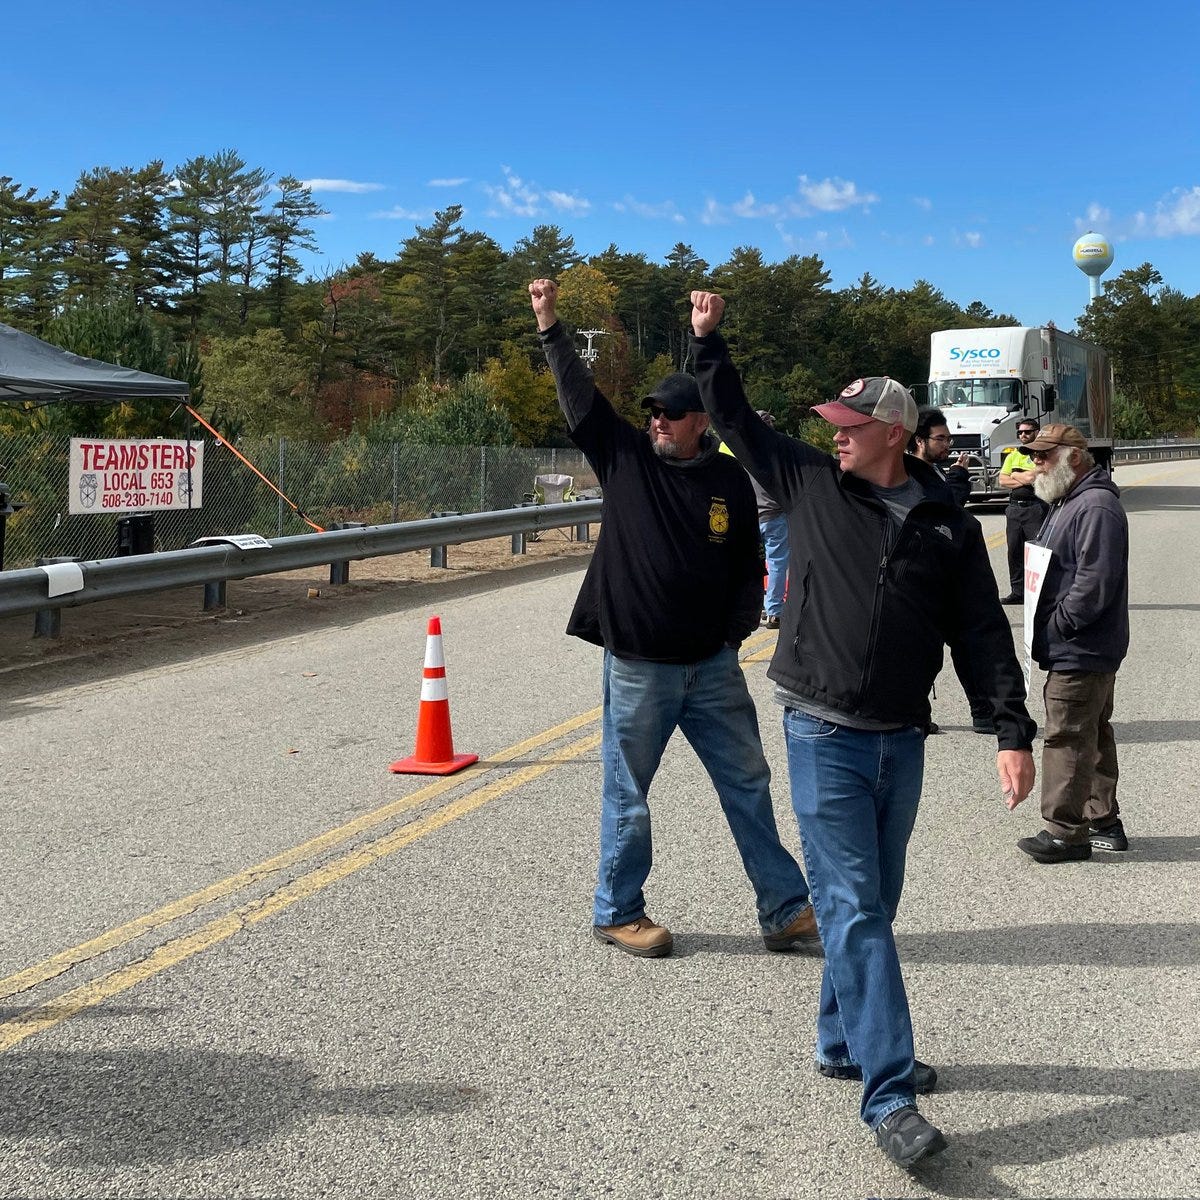 Two Teamsters raise their fists after a truck on nearby Route 44 honked in support